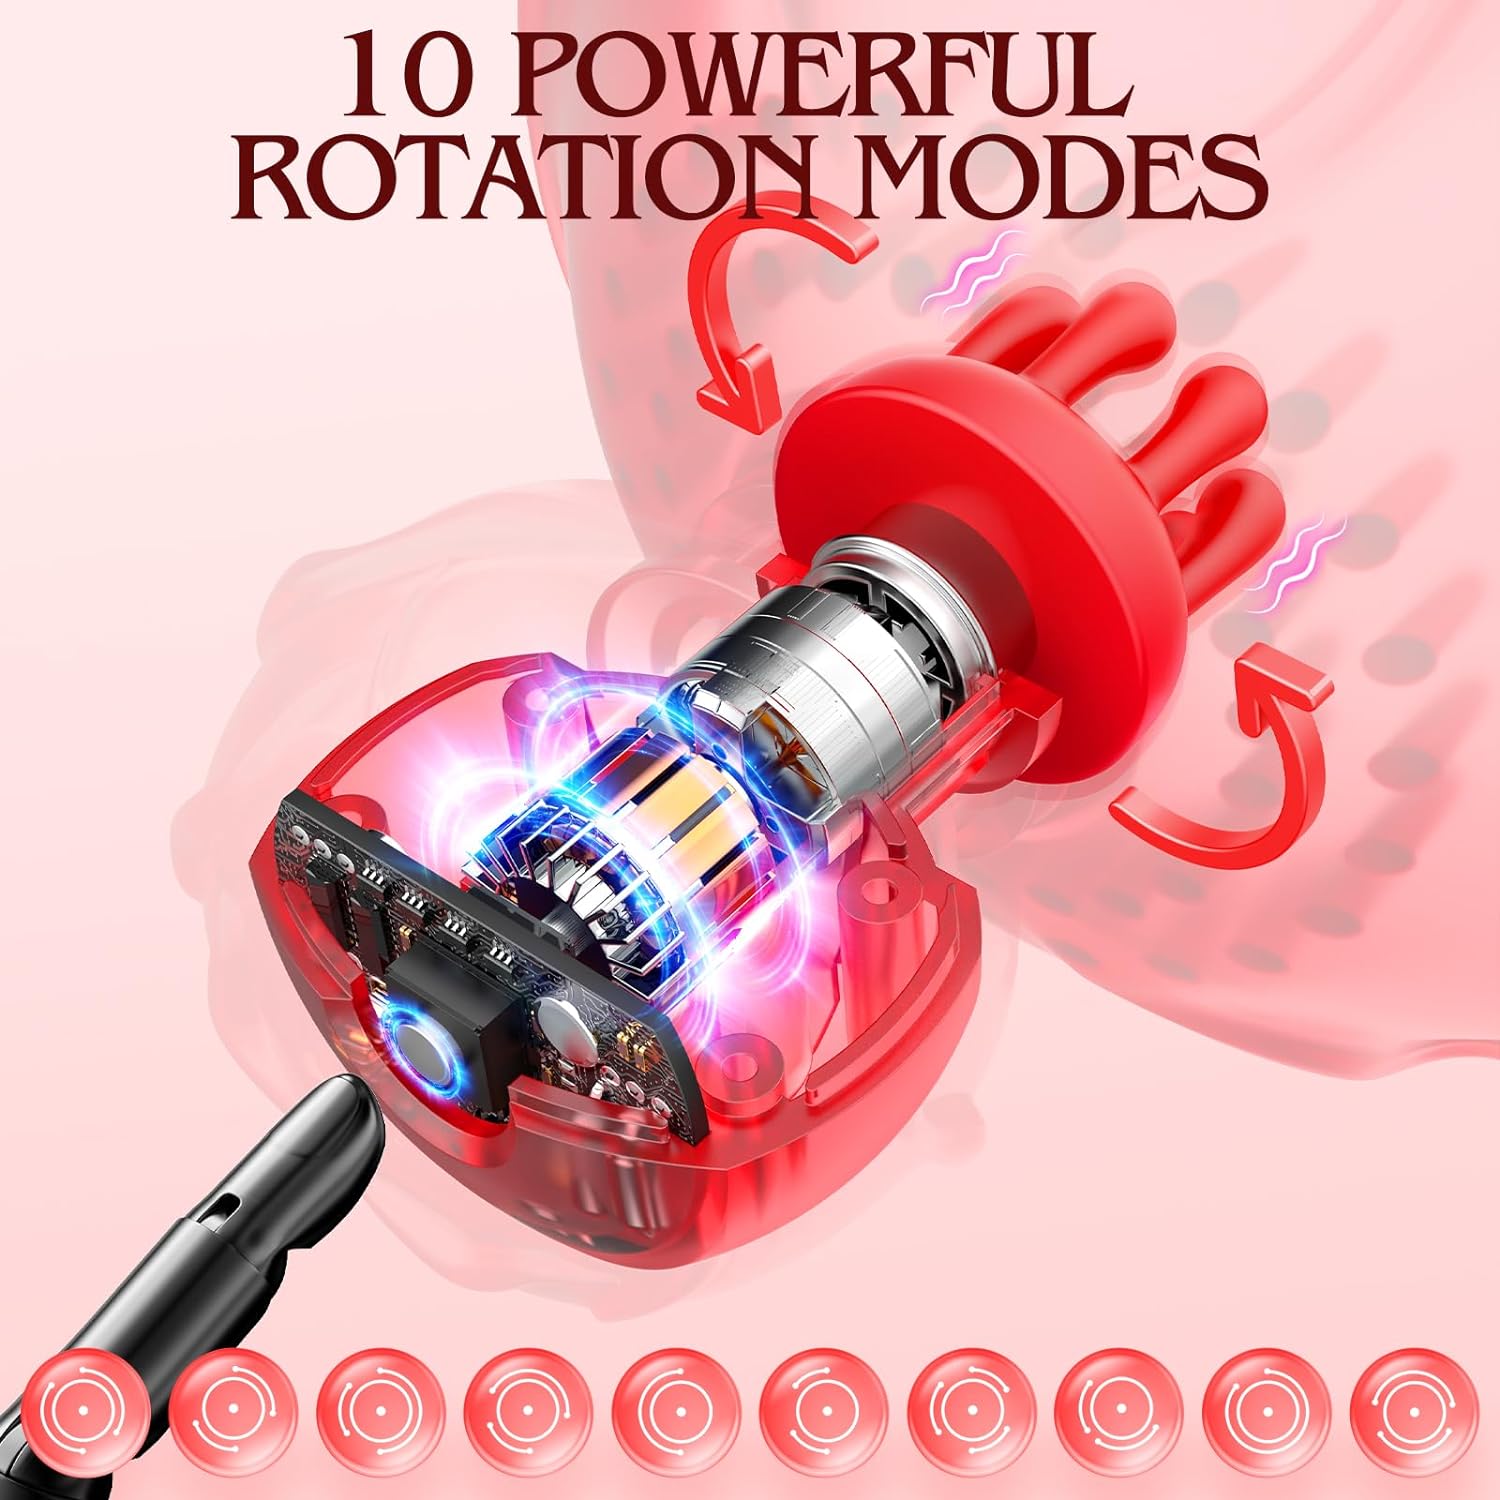 Sex Toys Nipple Toys Rotation - Sex Toy Sucking Stimulator Rose Sex Toy Wireless Nipple Clamps with 10 Powerful Rotation Modes, Rechargeable Adult Toys for Women Couples Pleasure Red